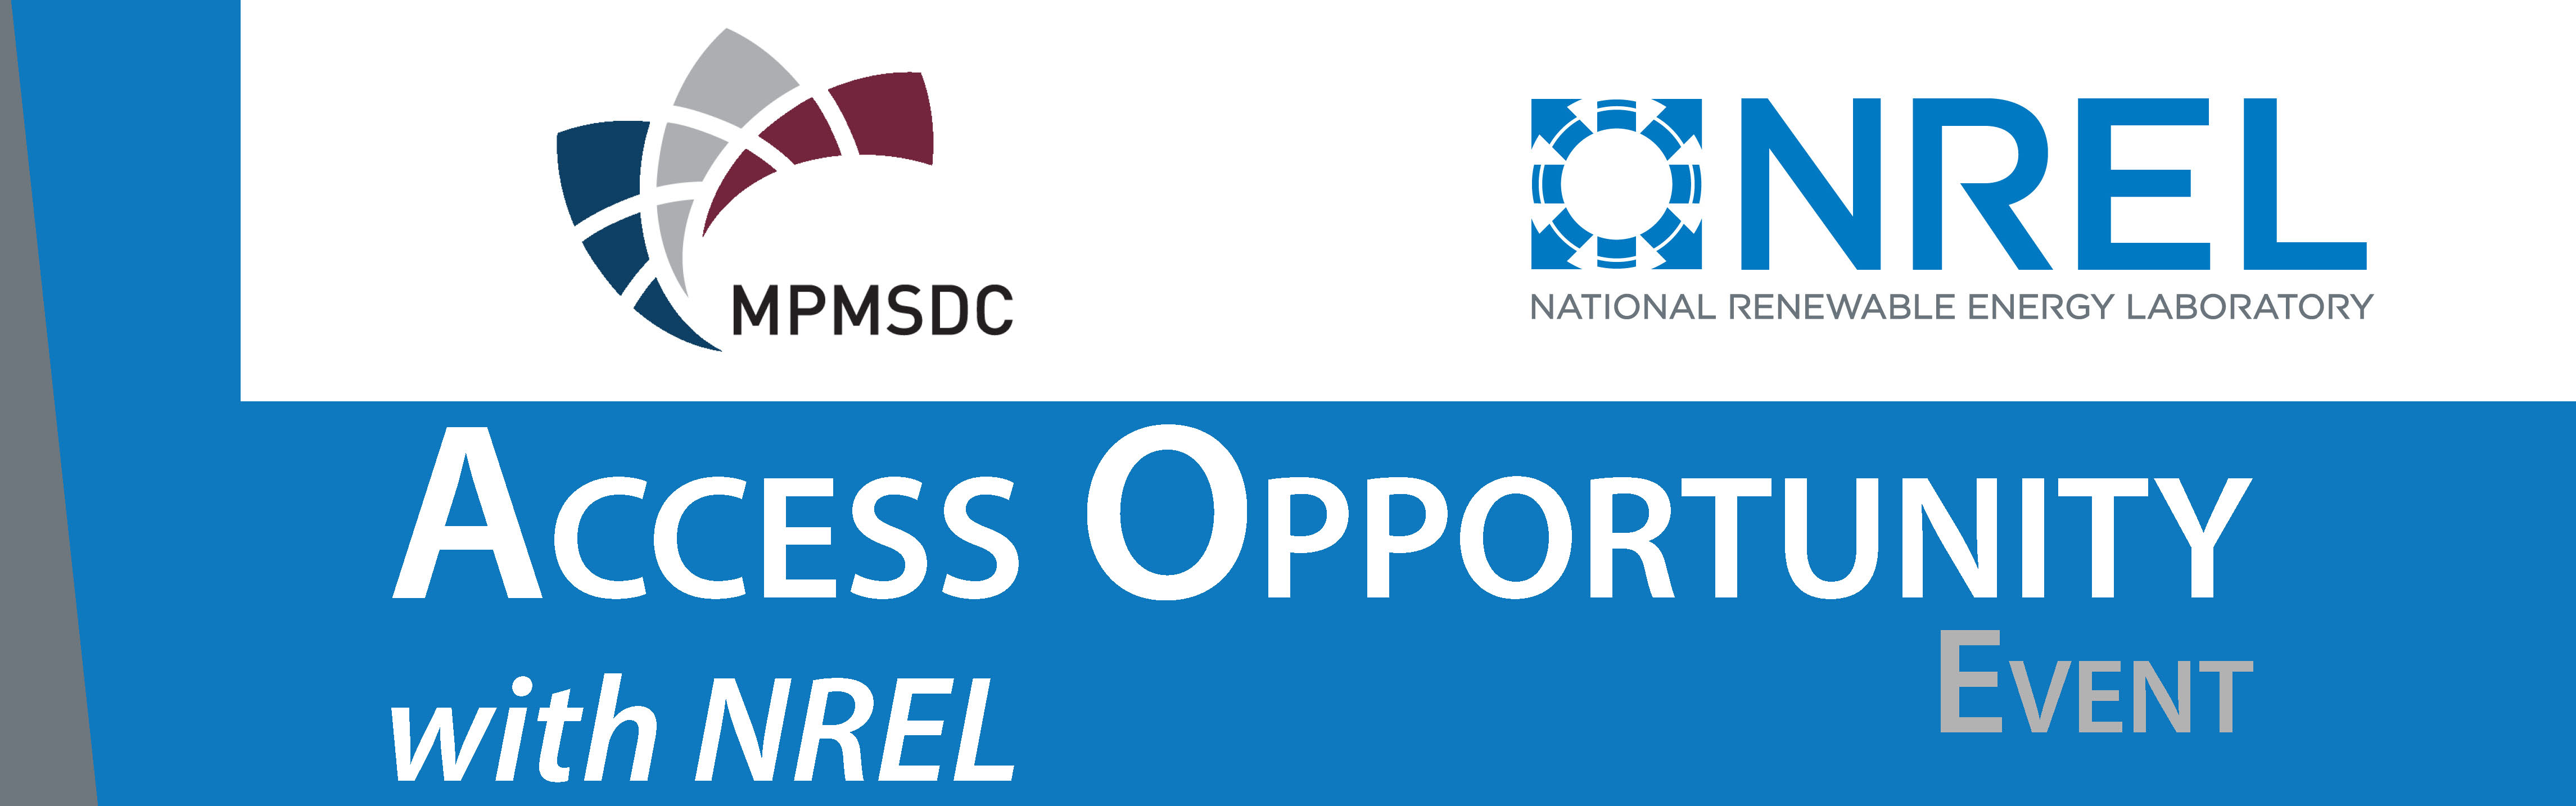 Access Opportunity with NREL – June 25, 2015